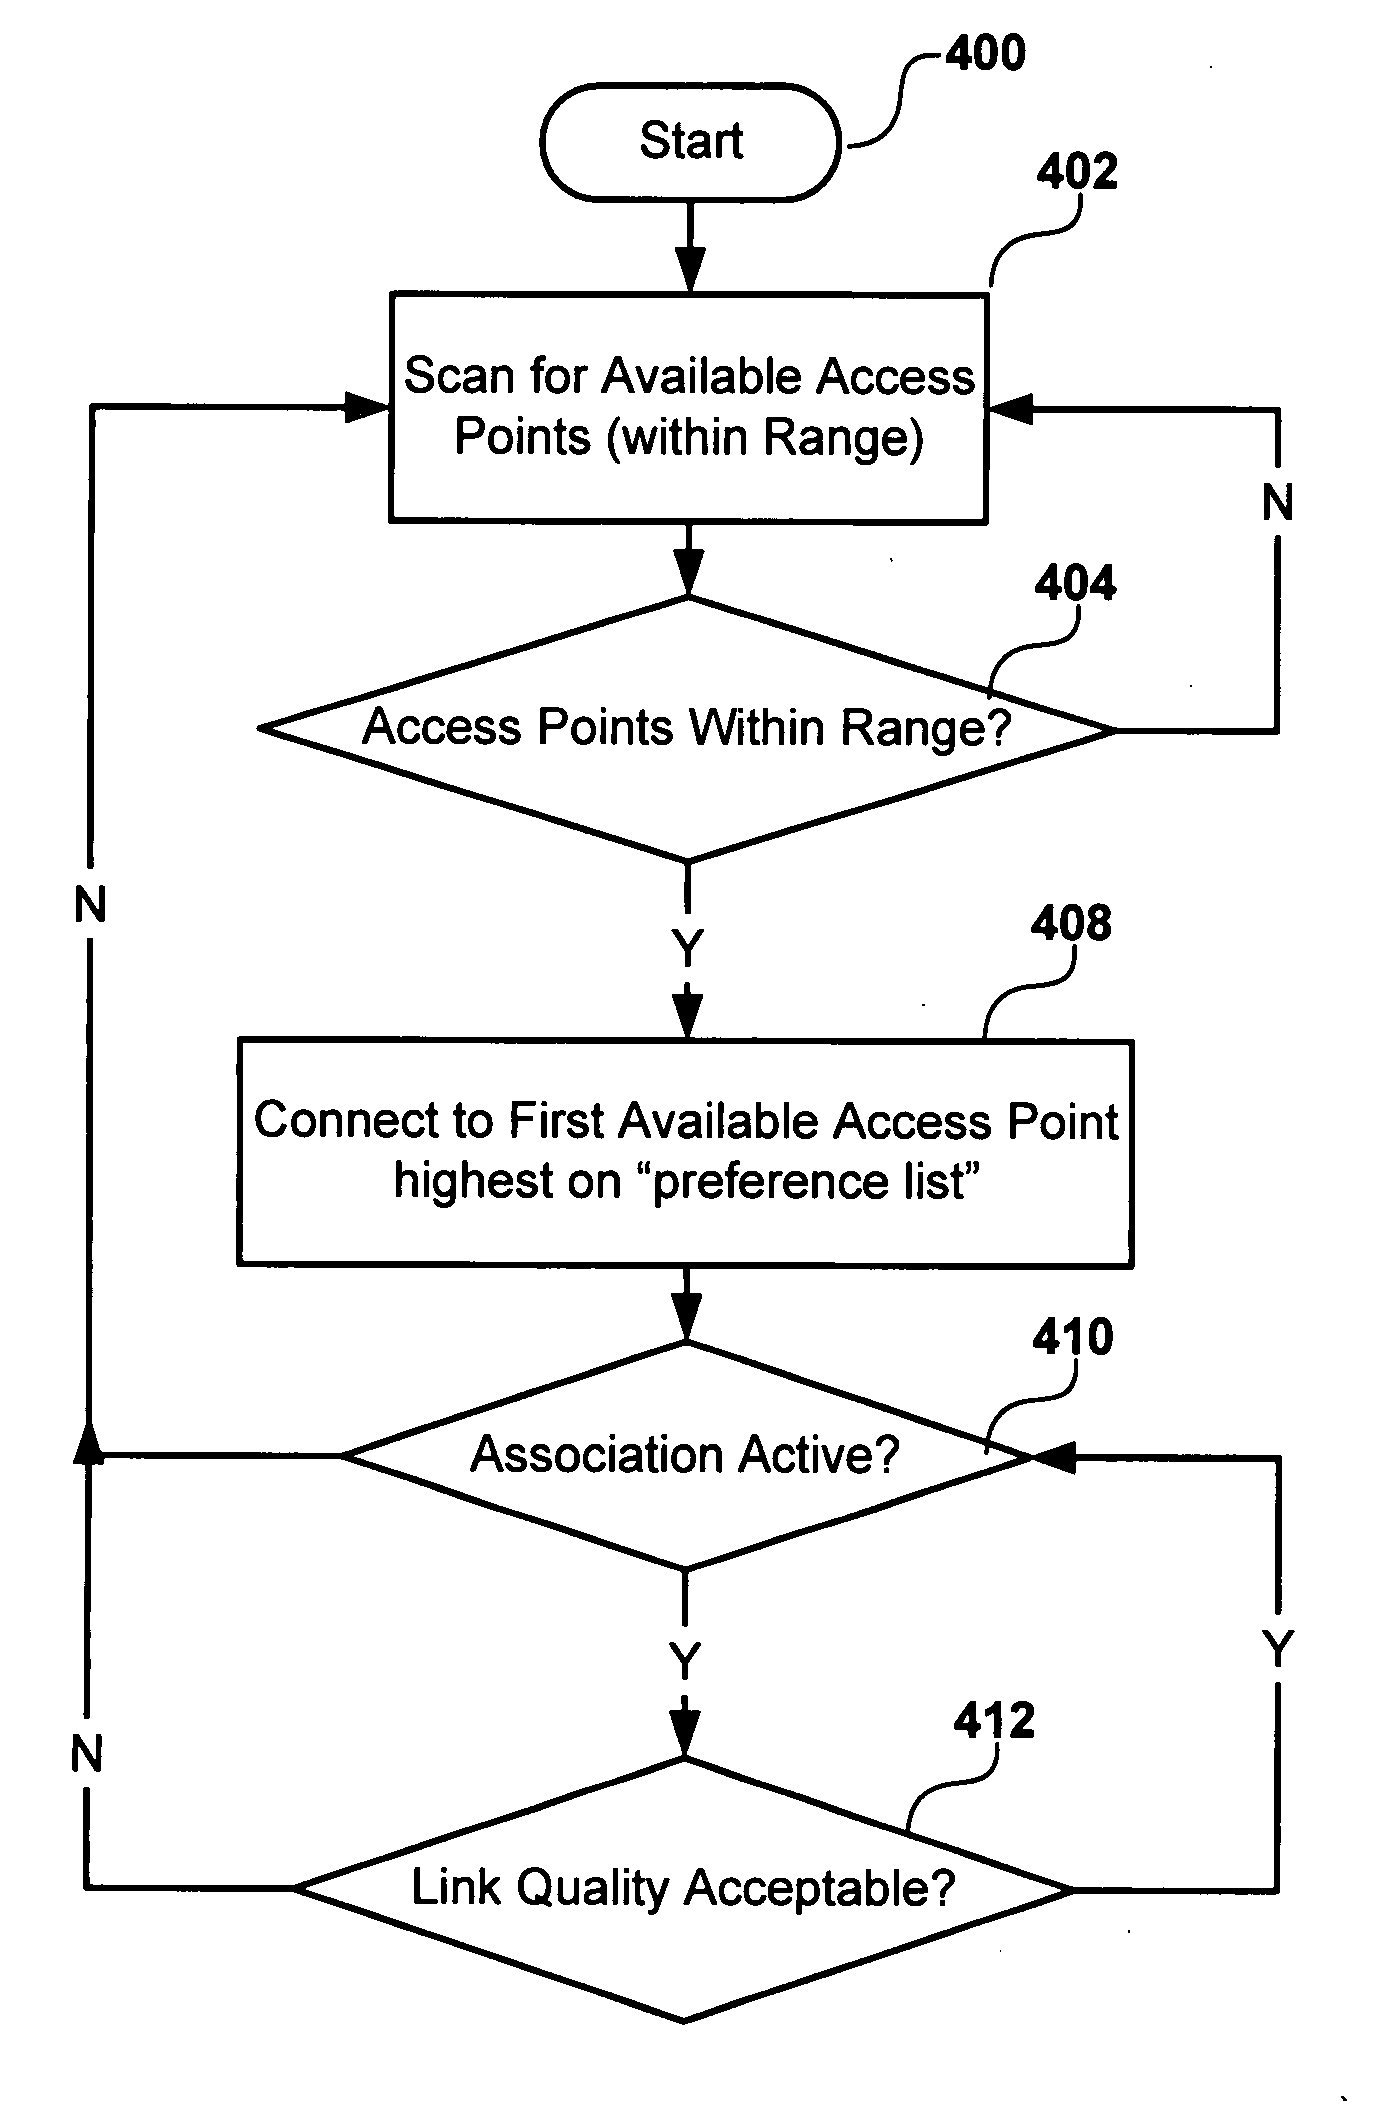 Autonomic client reassociation in a wireless local area network